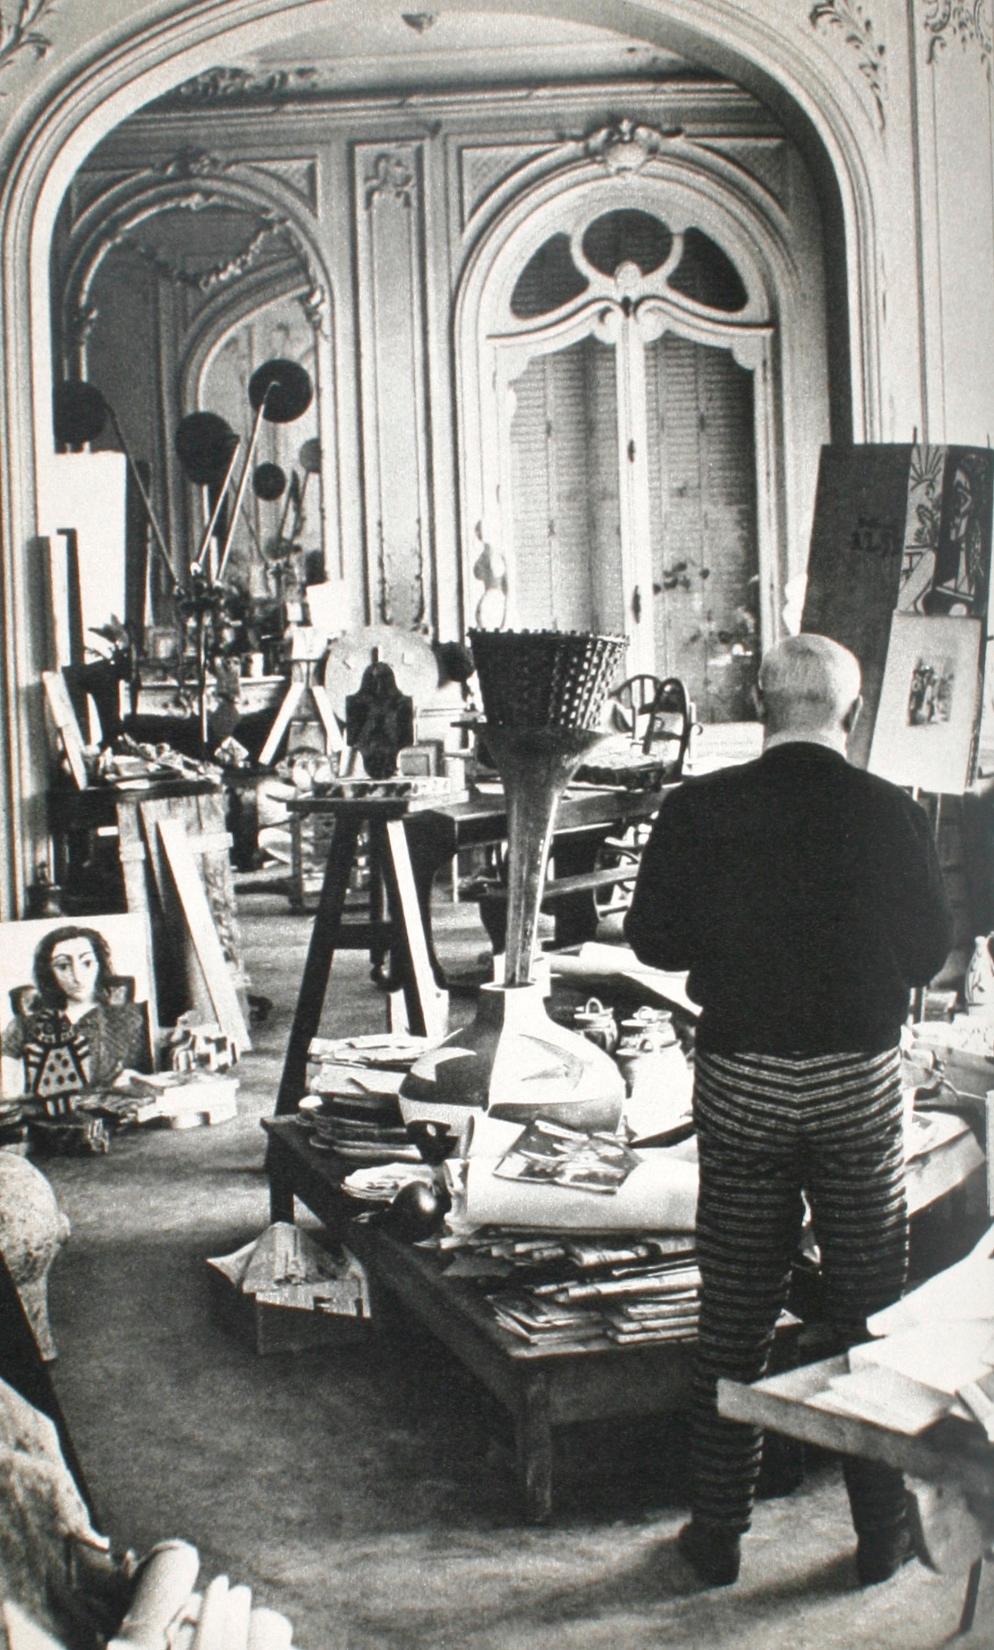 20th Century The Private World of Pablo Picasso by David Douglas Duncan